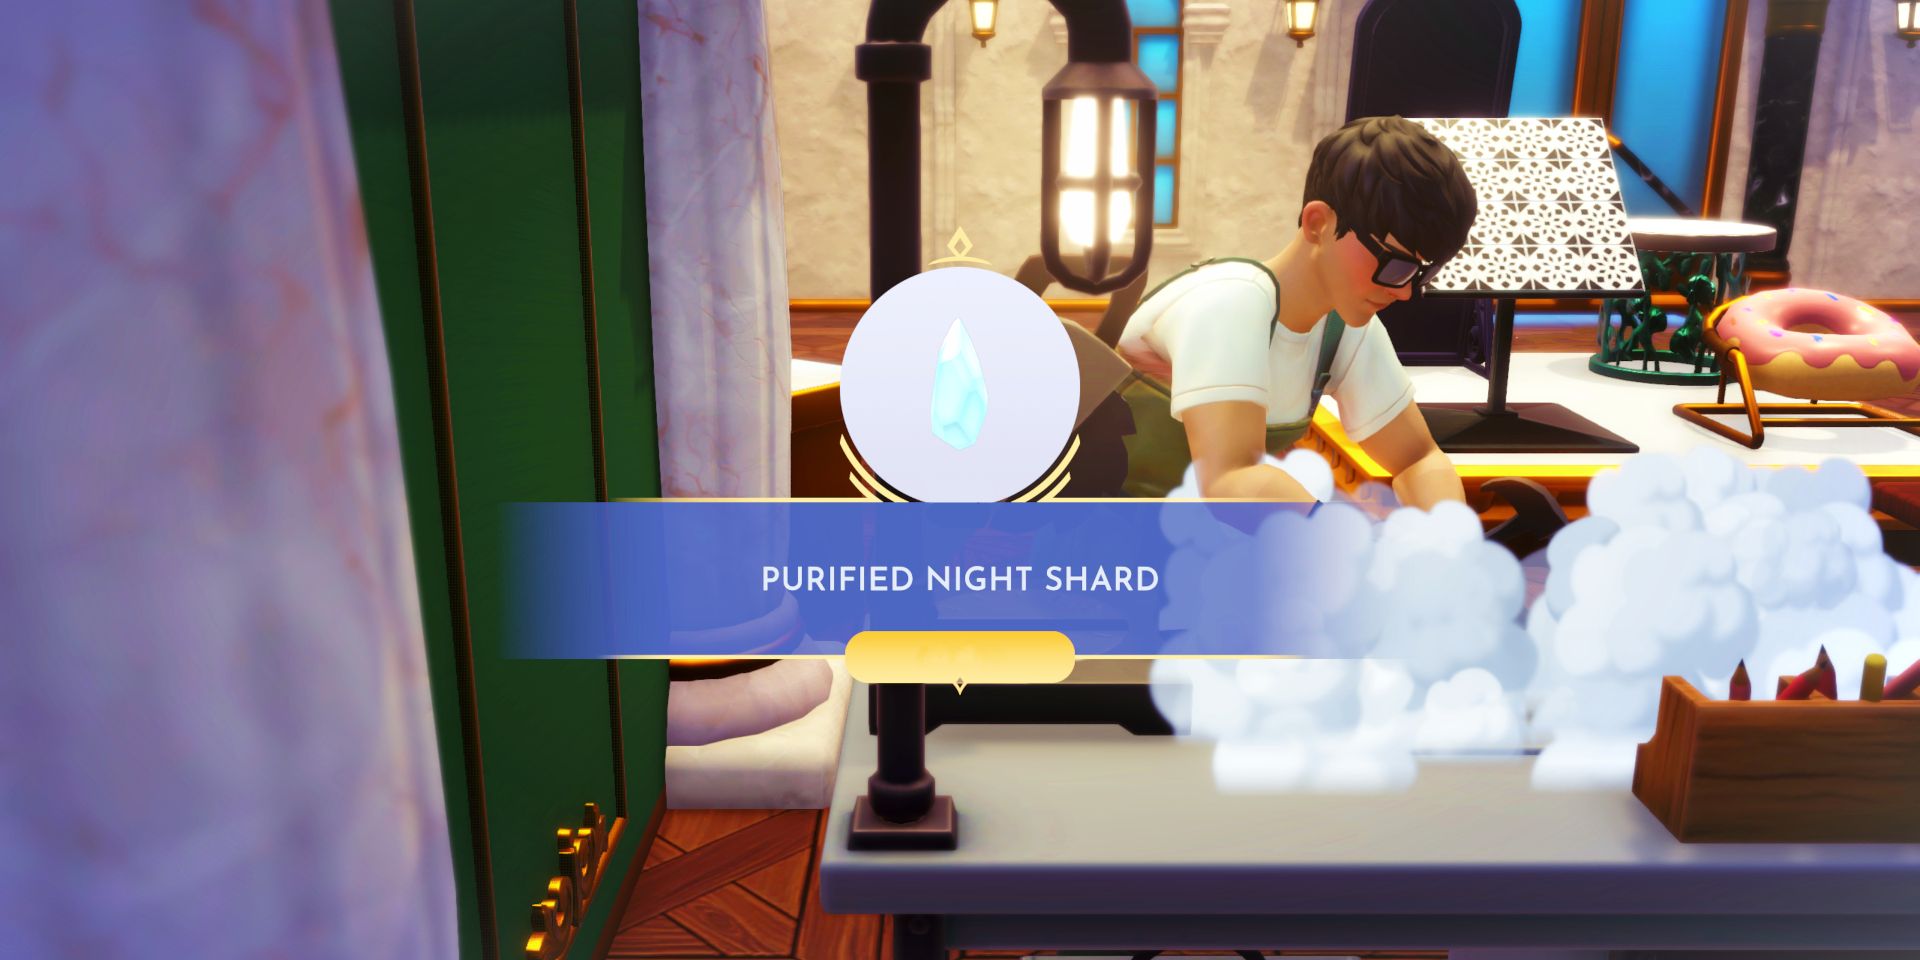 Disney Dreamlight Valley Player Crafting A Purified Night Shard